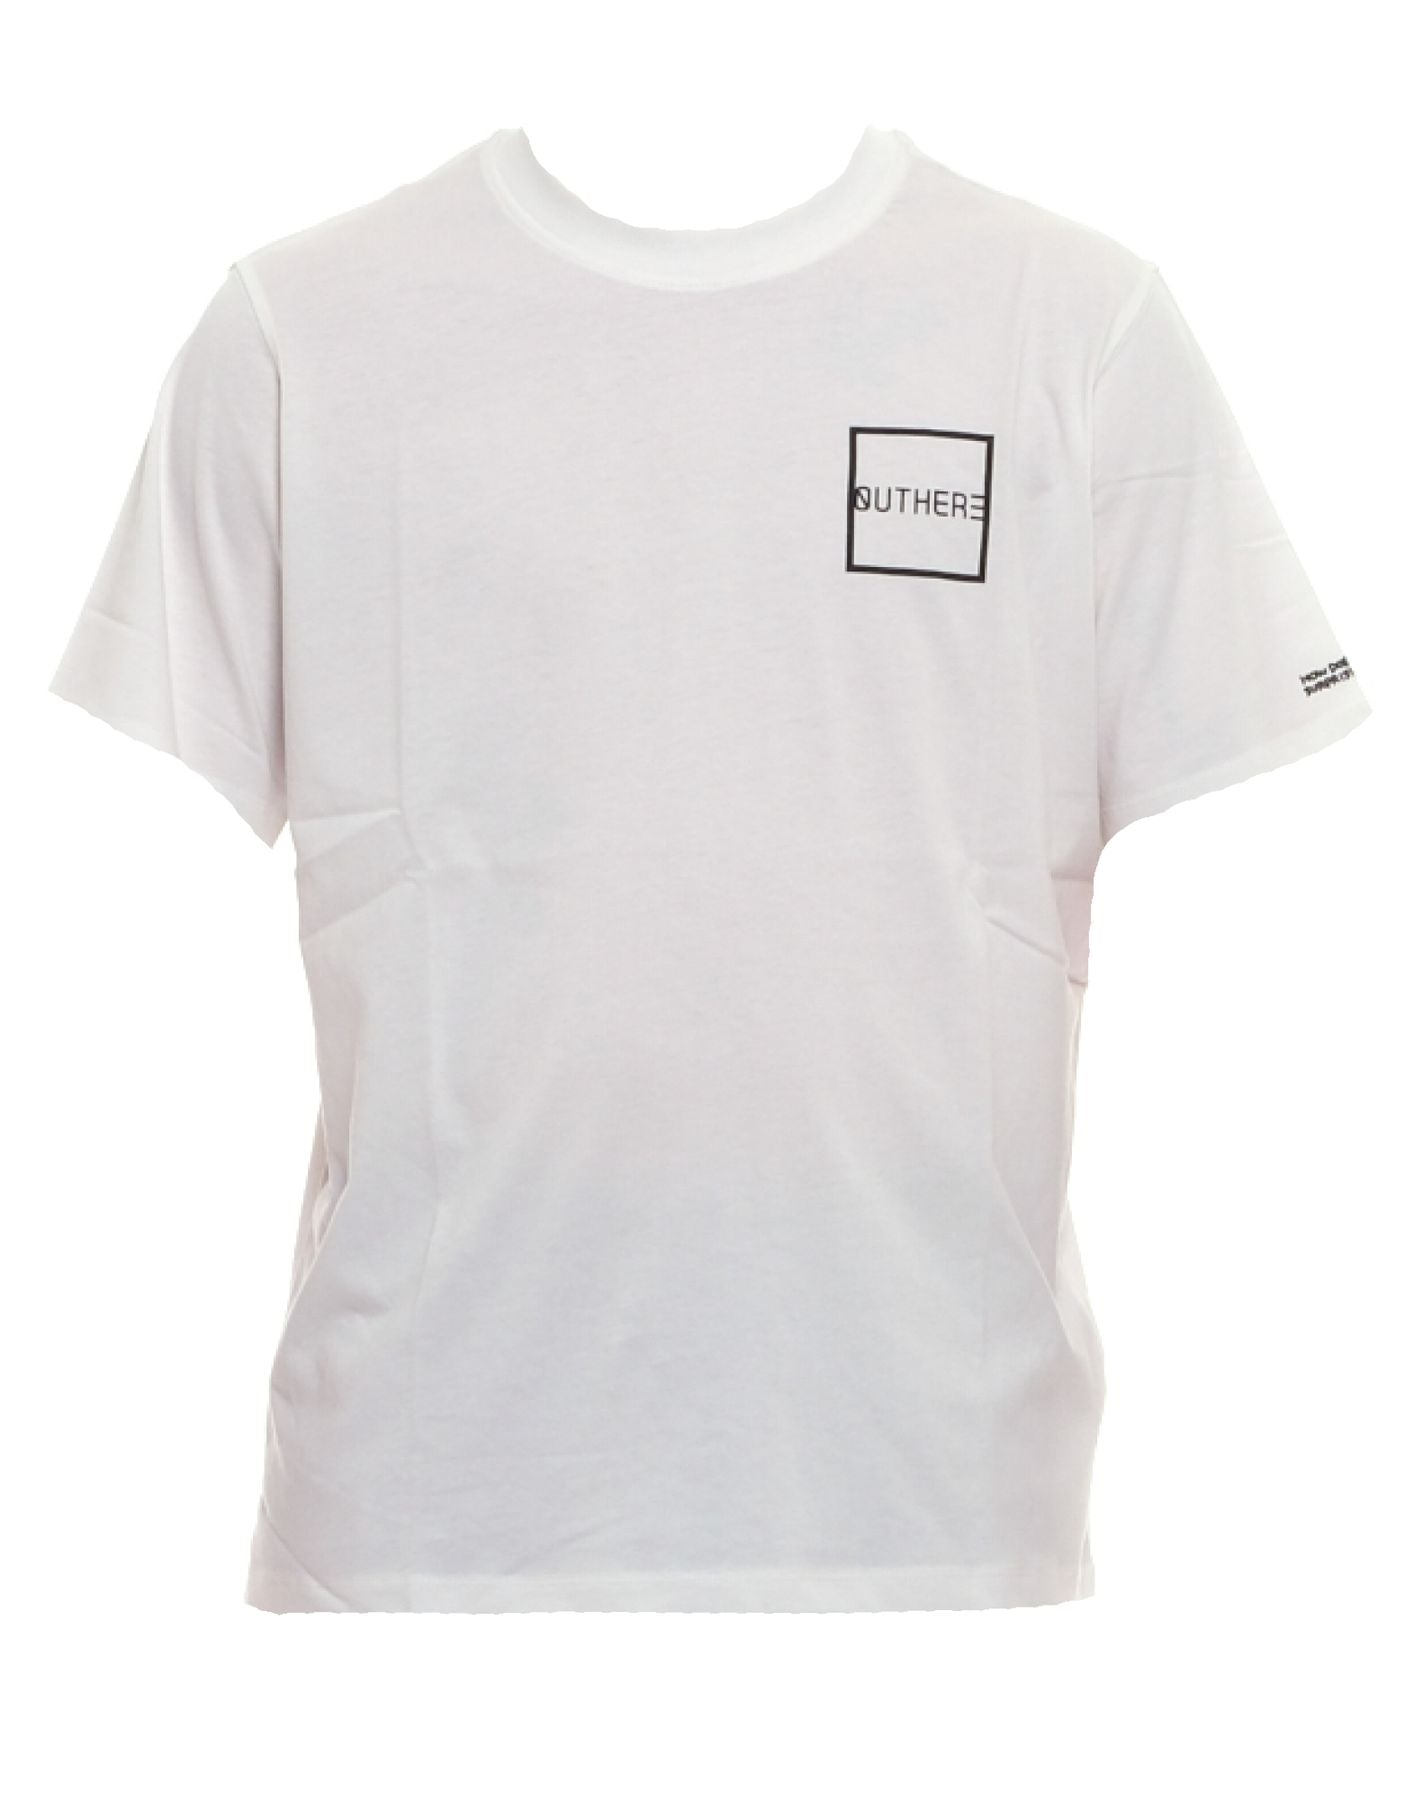 T-shirt man EOTM136AG95 WHITE OUTHERE